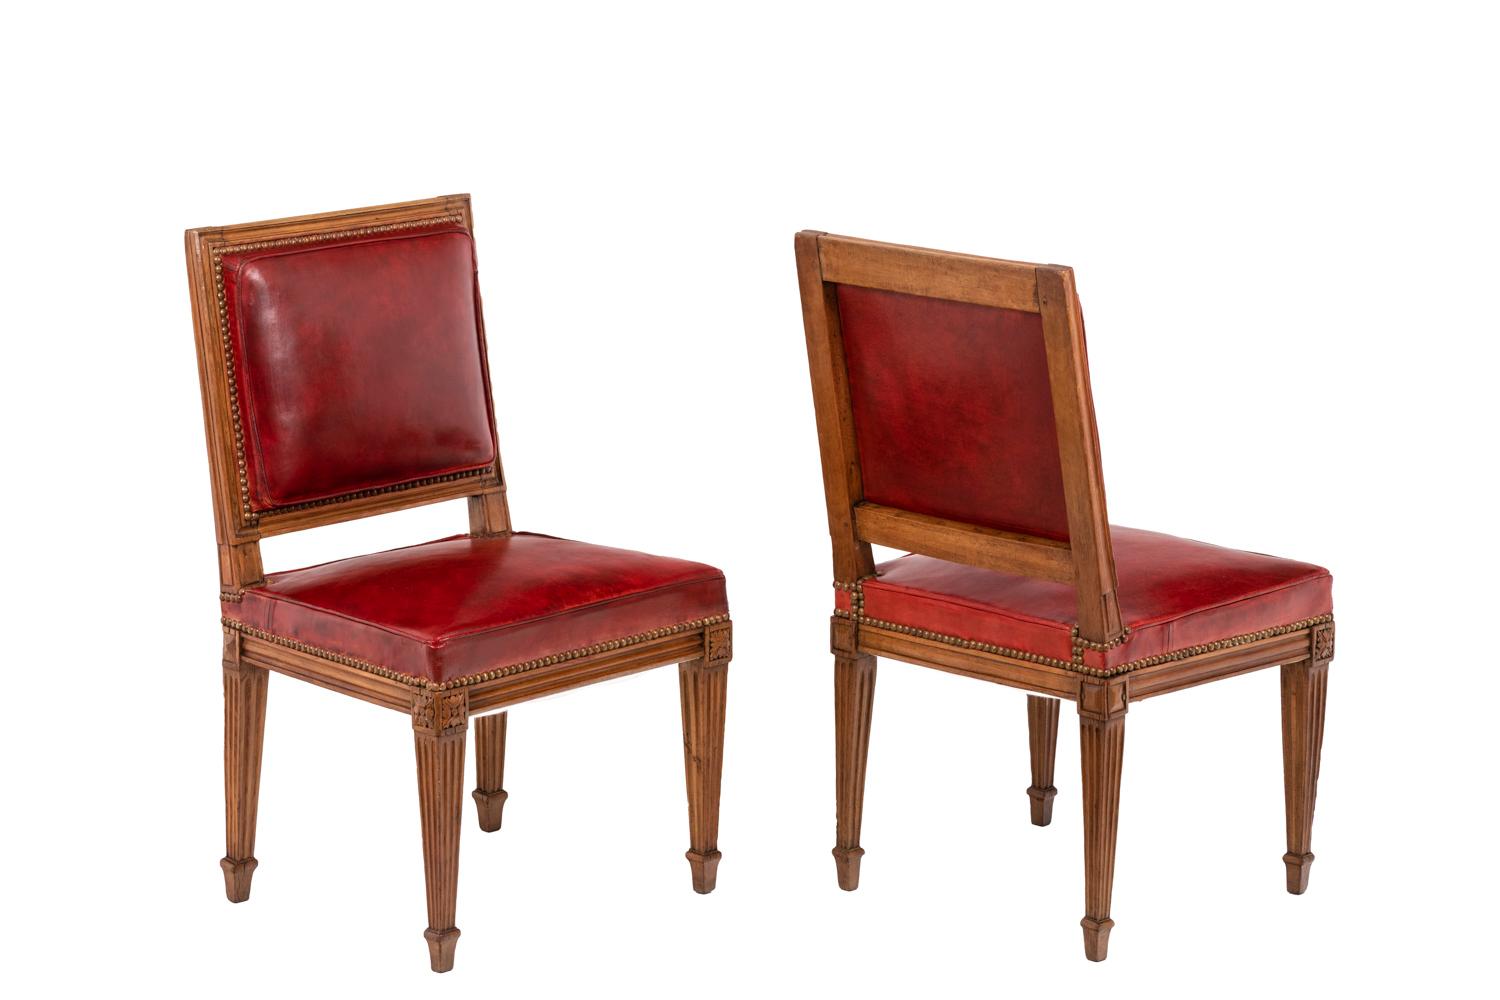 European Series of Three Chairs in Wood and Leather, Louis XVI Era